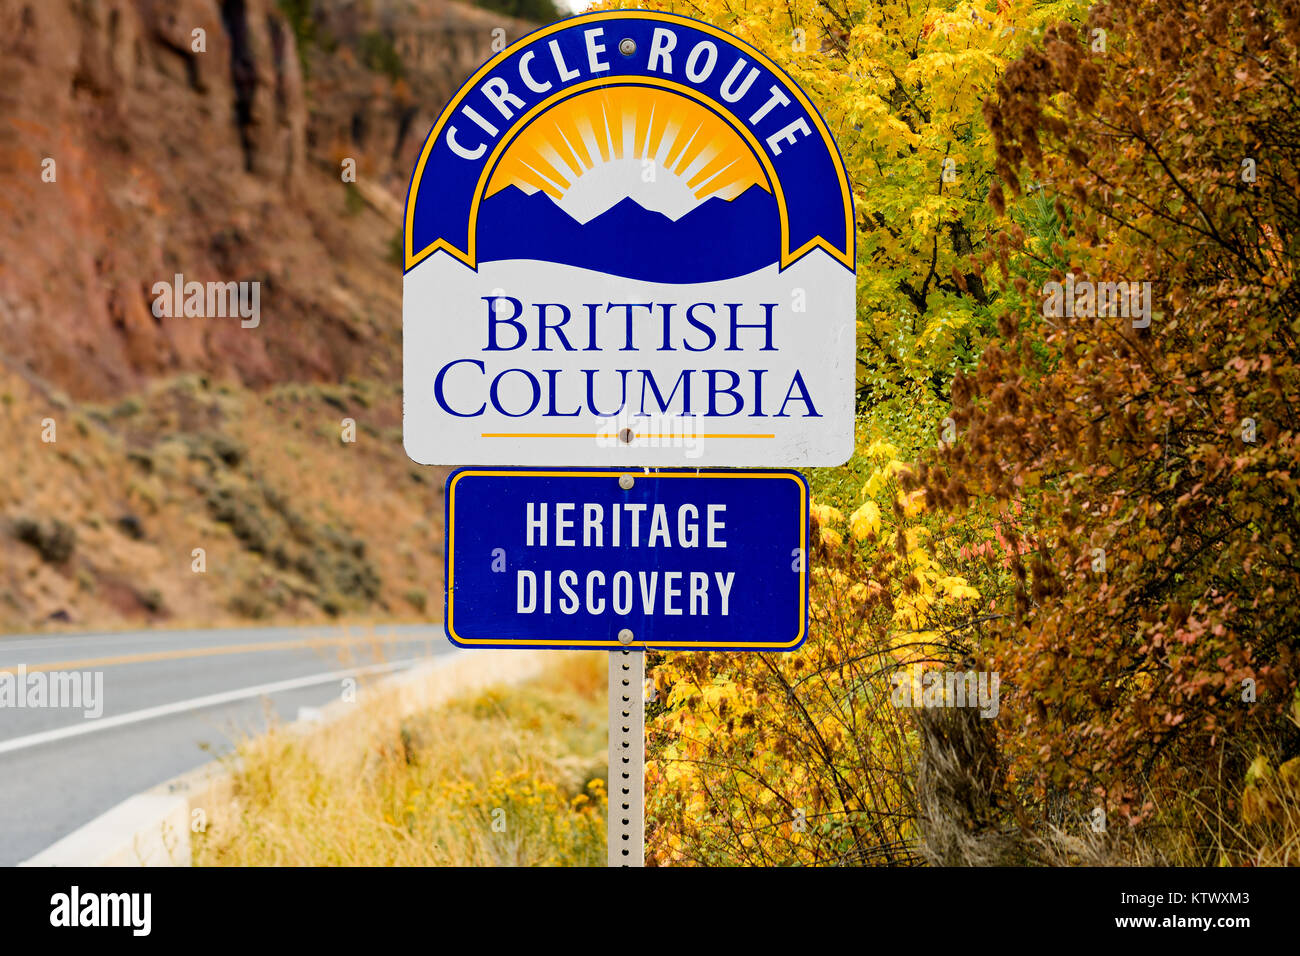 Road Sign of Heritage Discovery Circle Route, British Columbia, Canada Stock Photo